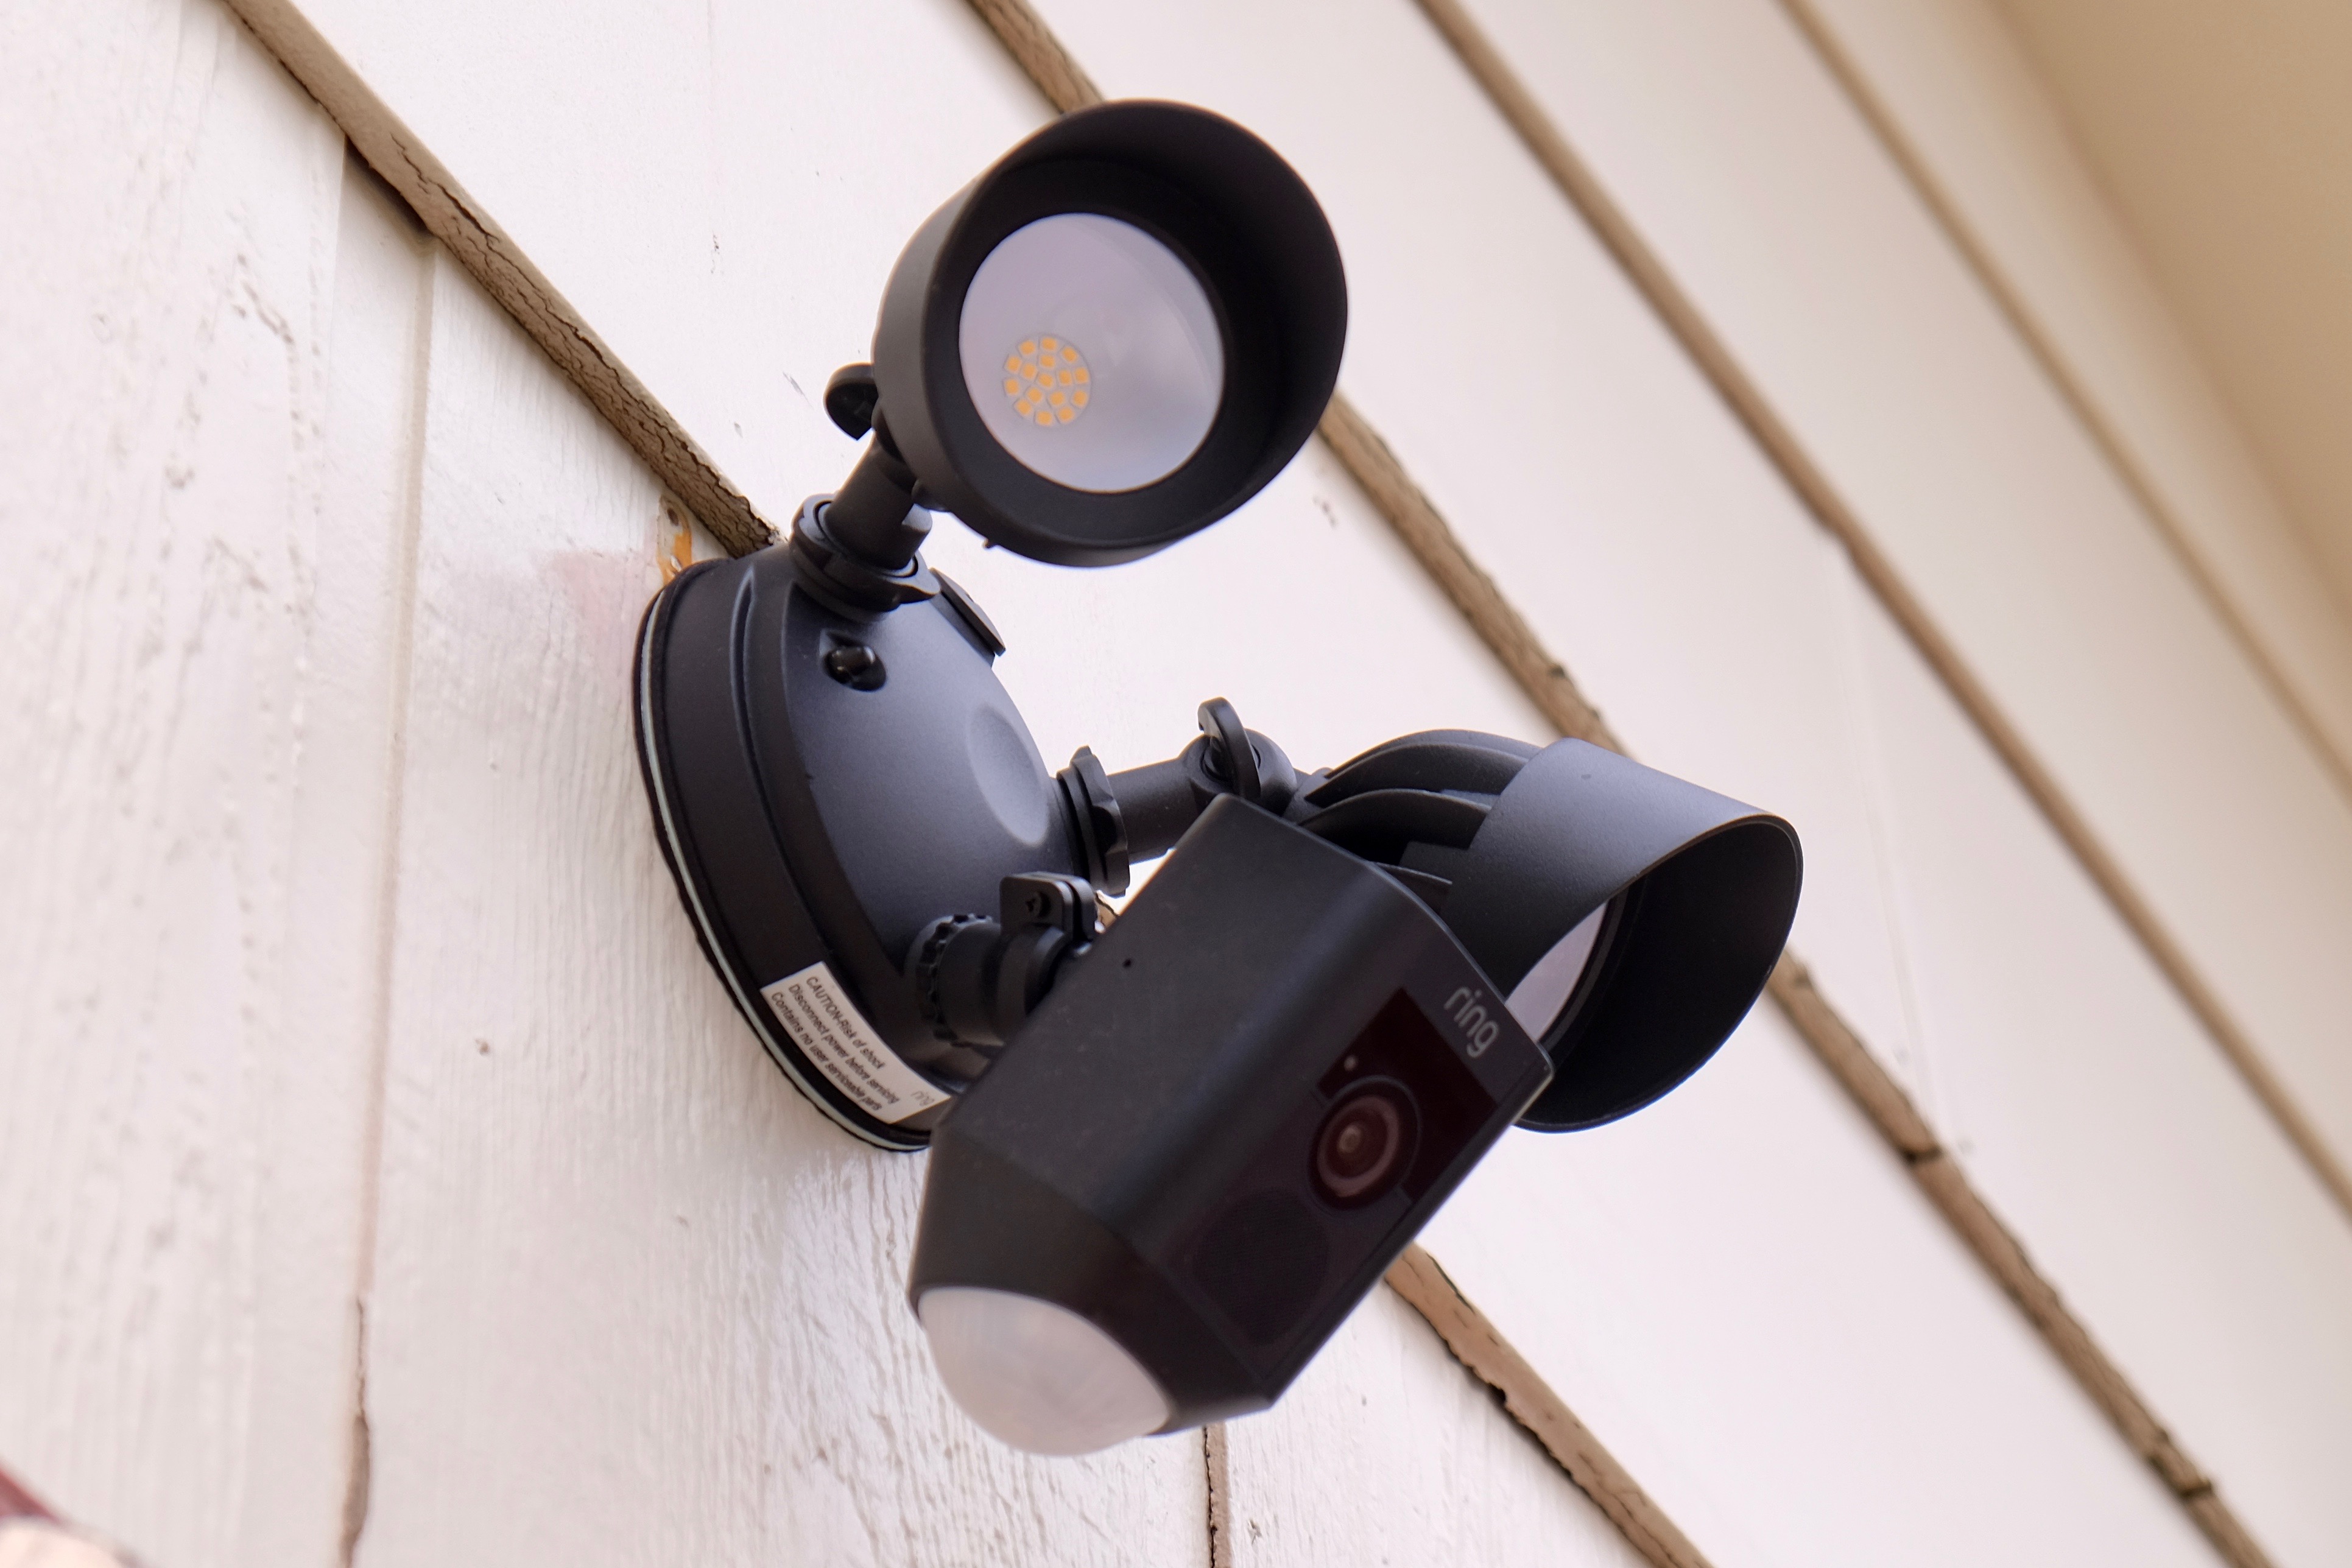 Ring Floodlight Cam Review A Logical